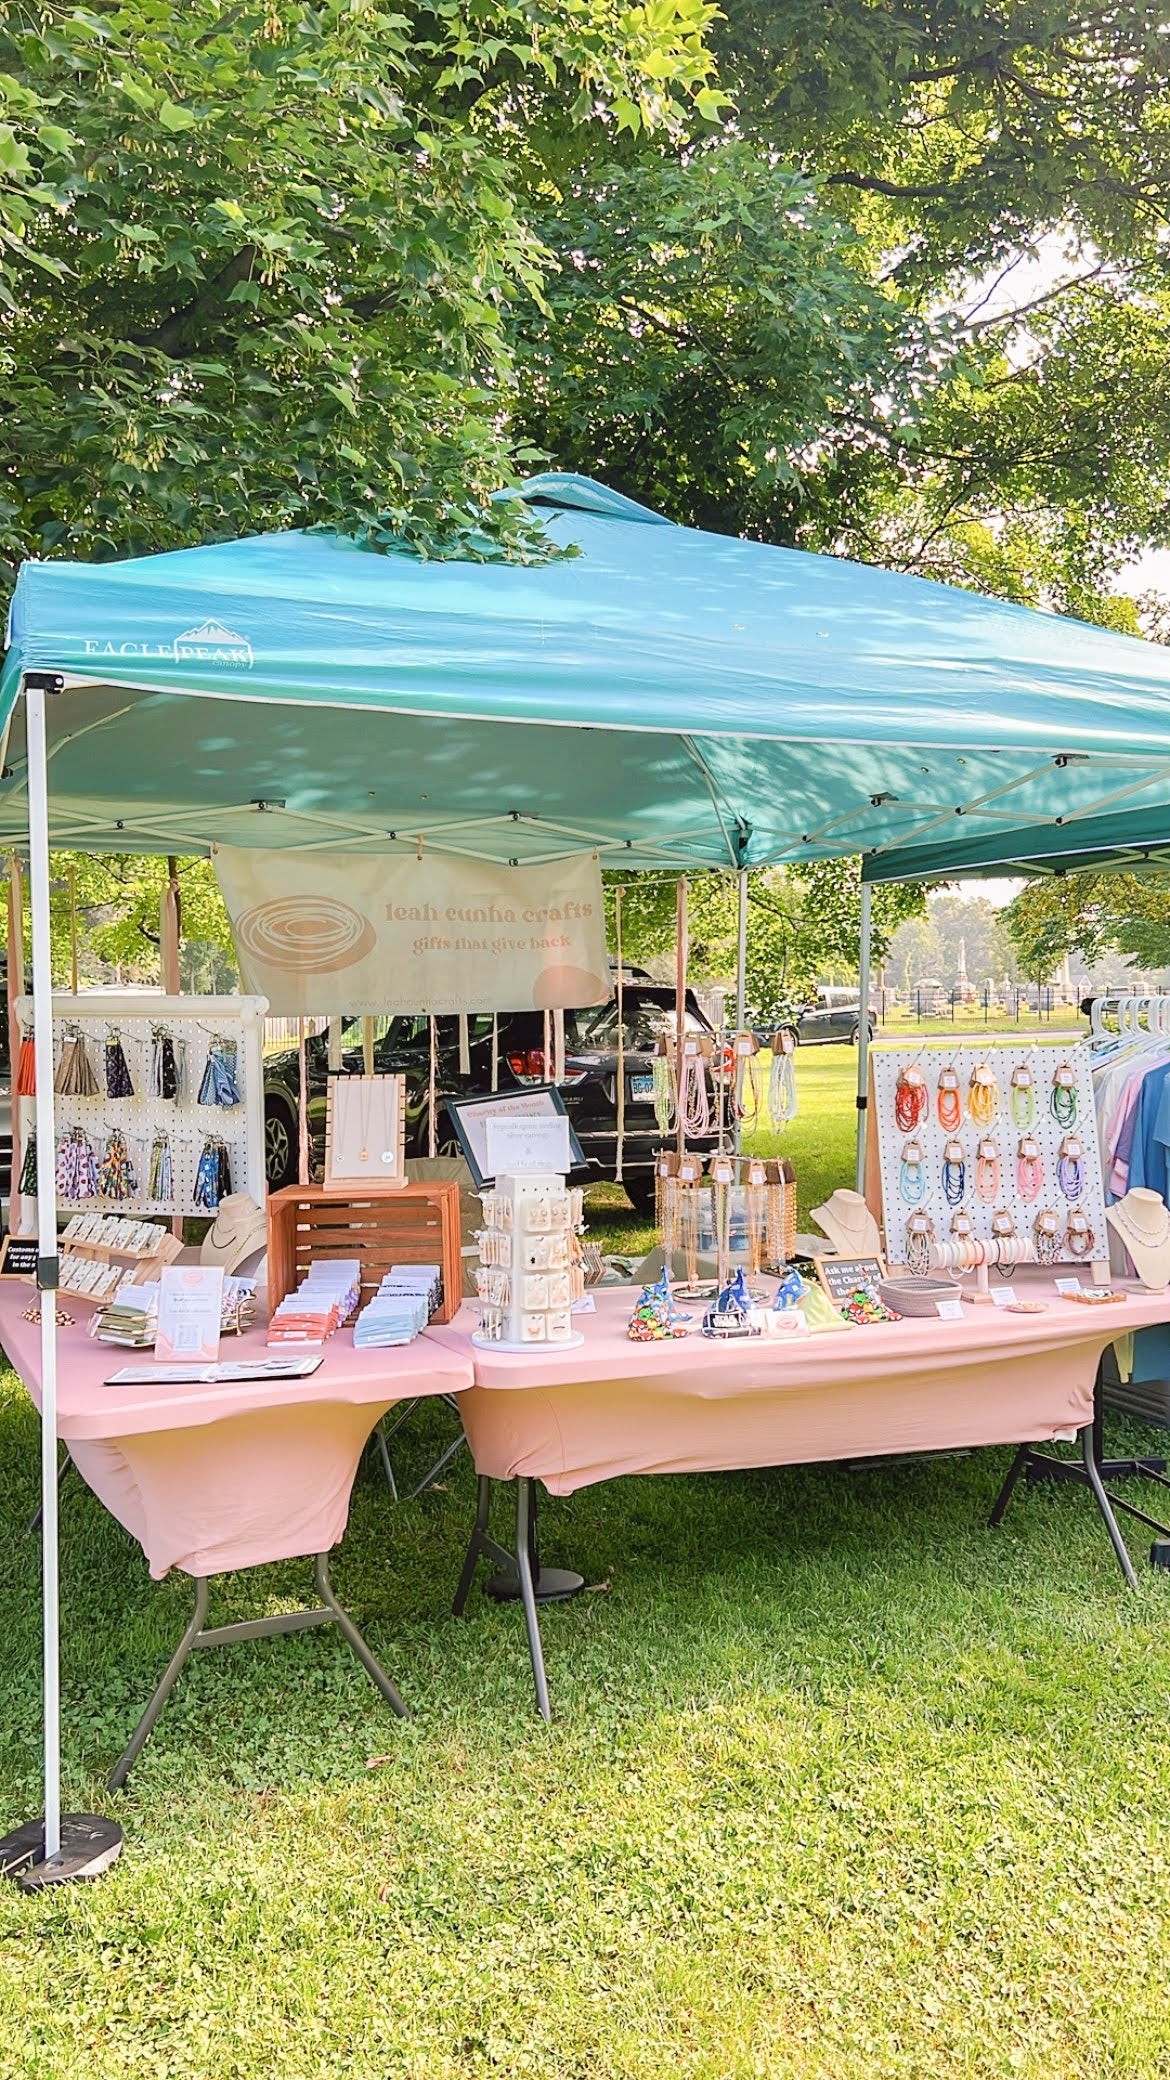 A craft fair booth with a blue tent, pink tablecloths, and lots of jewelry and accessories